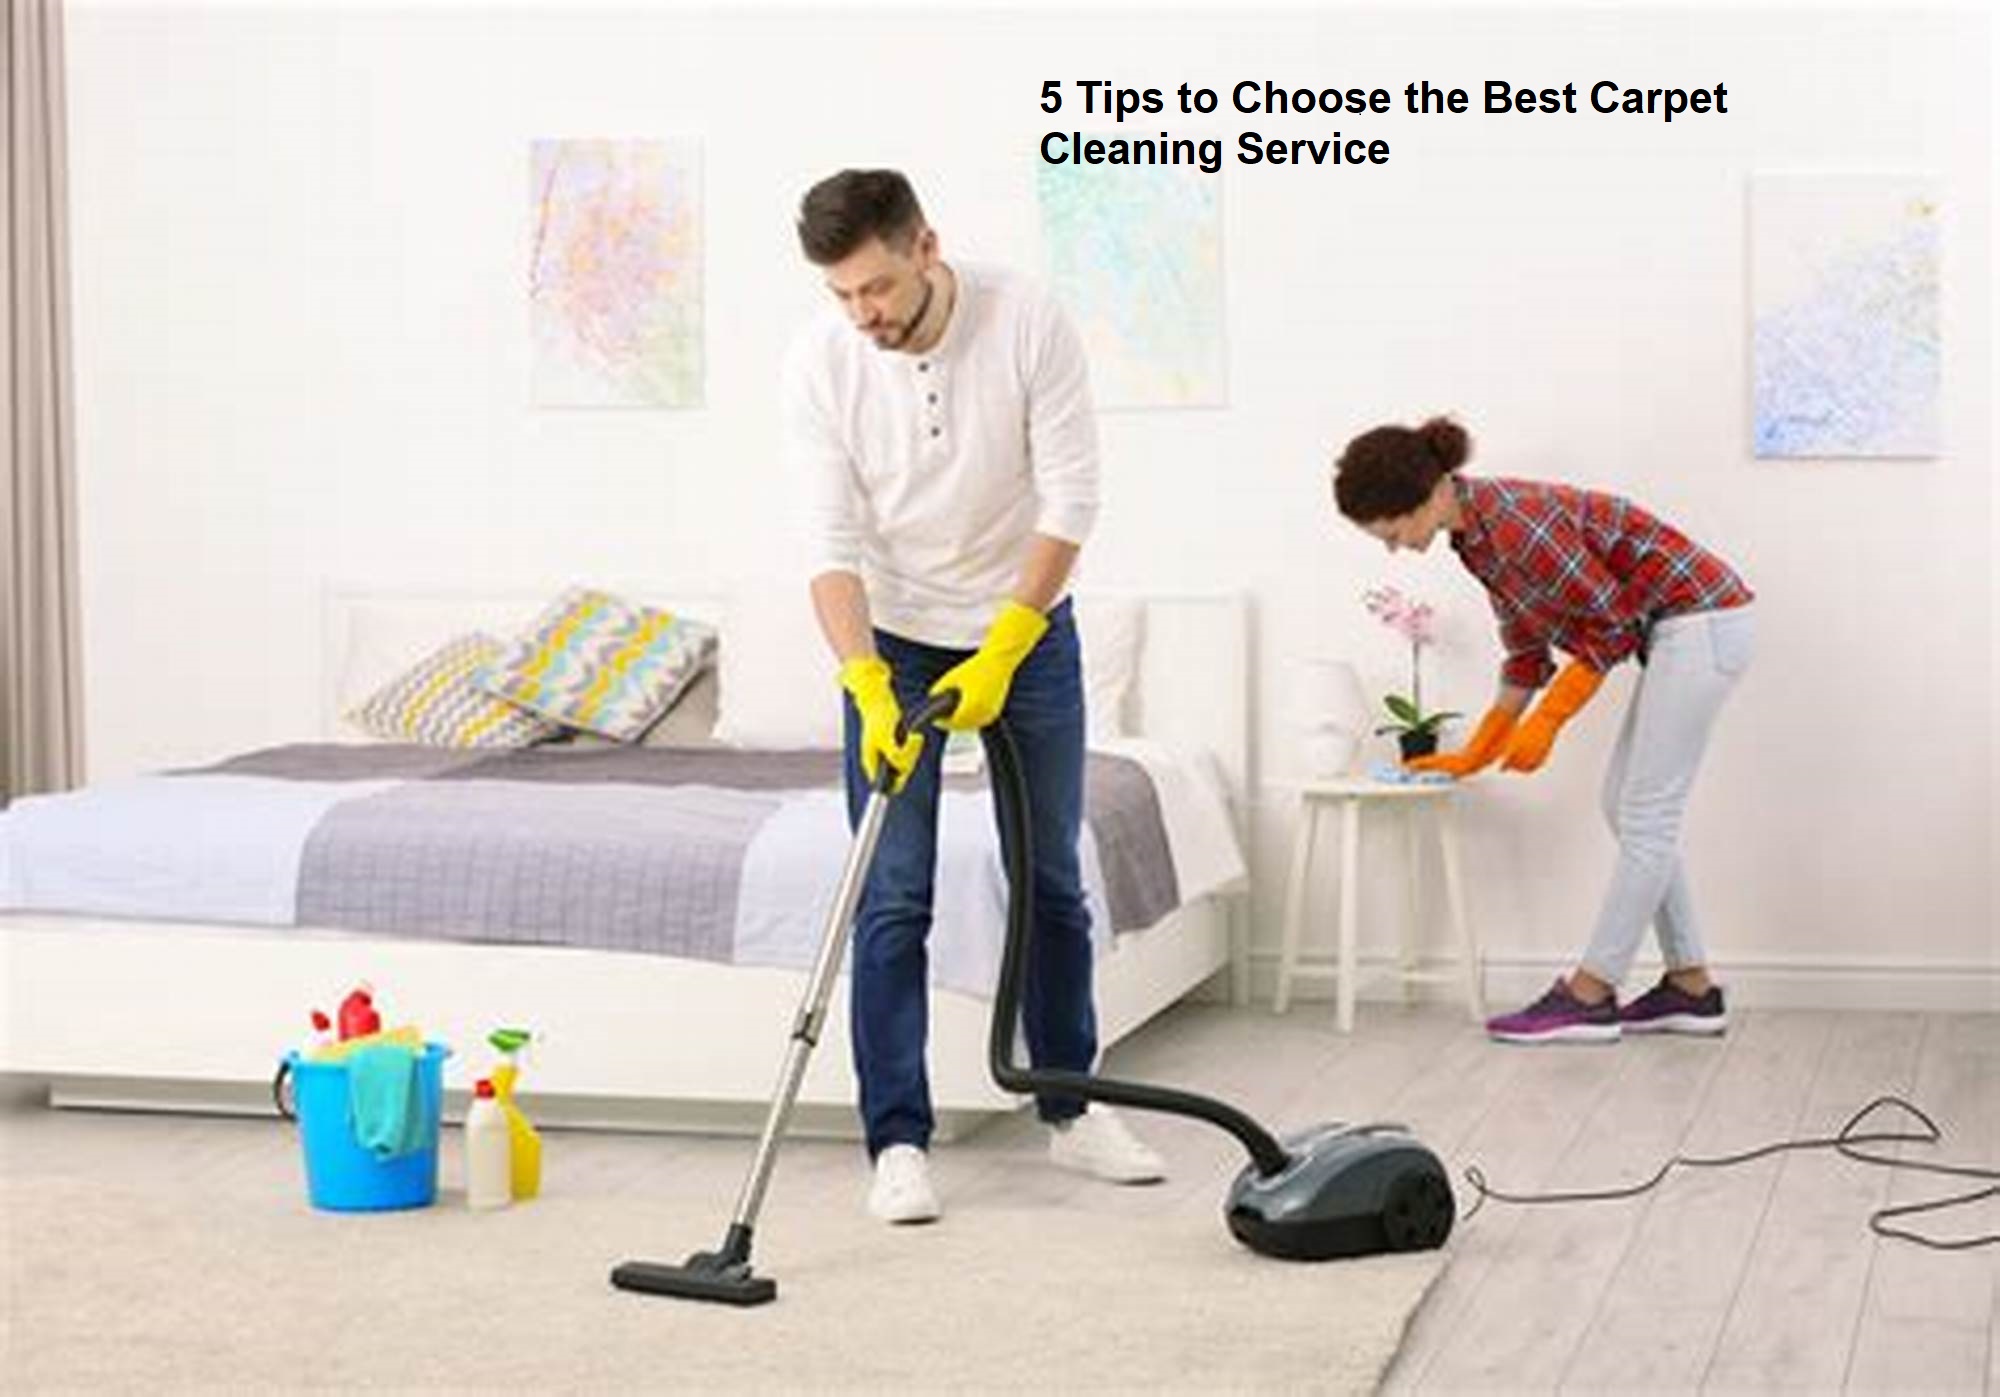 5 Tips to Choose the Best Carpet Cleaning Service